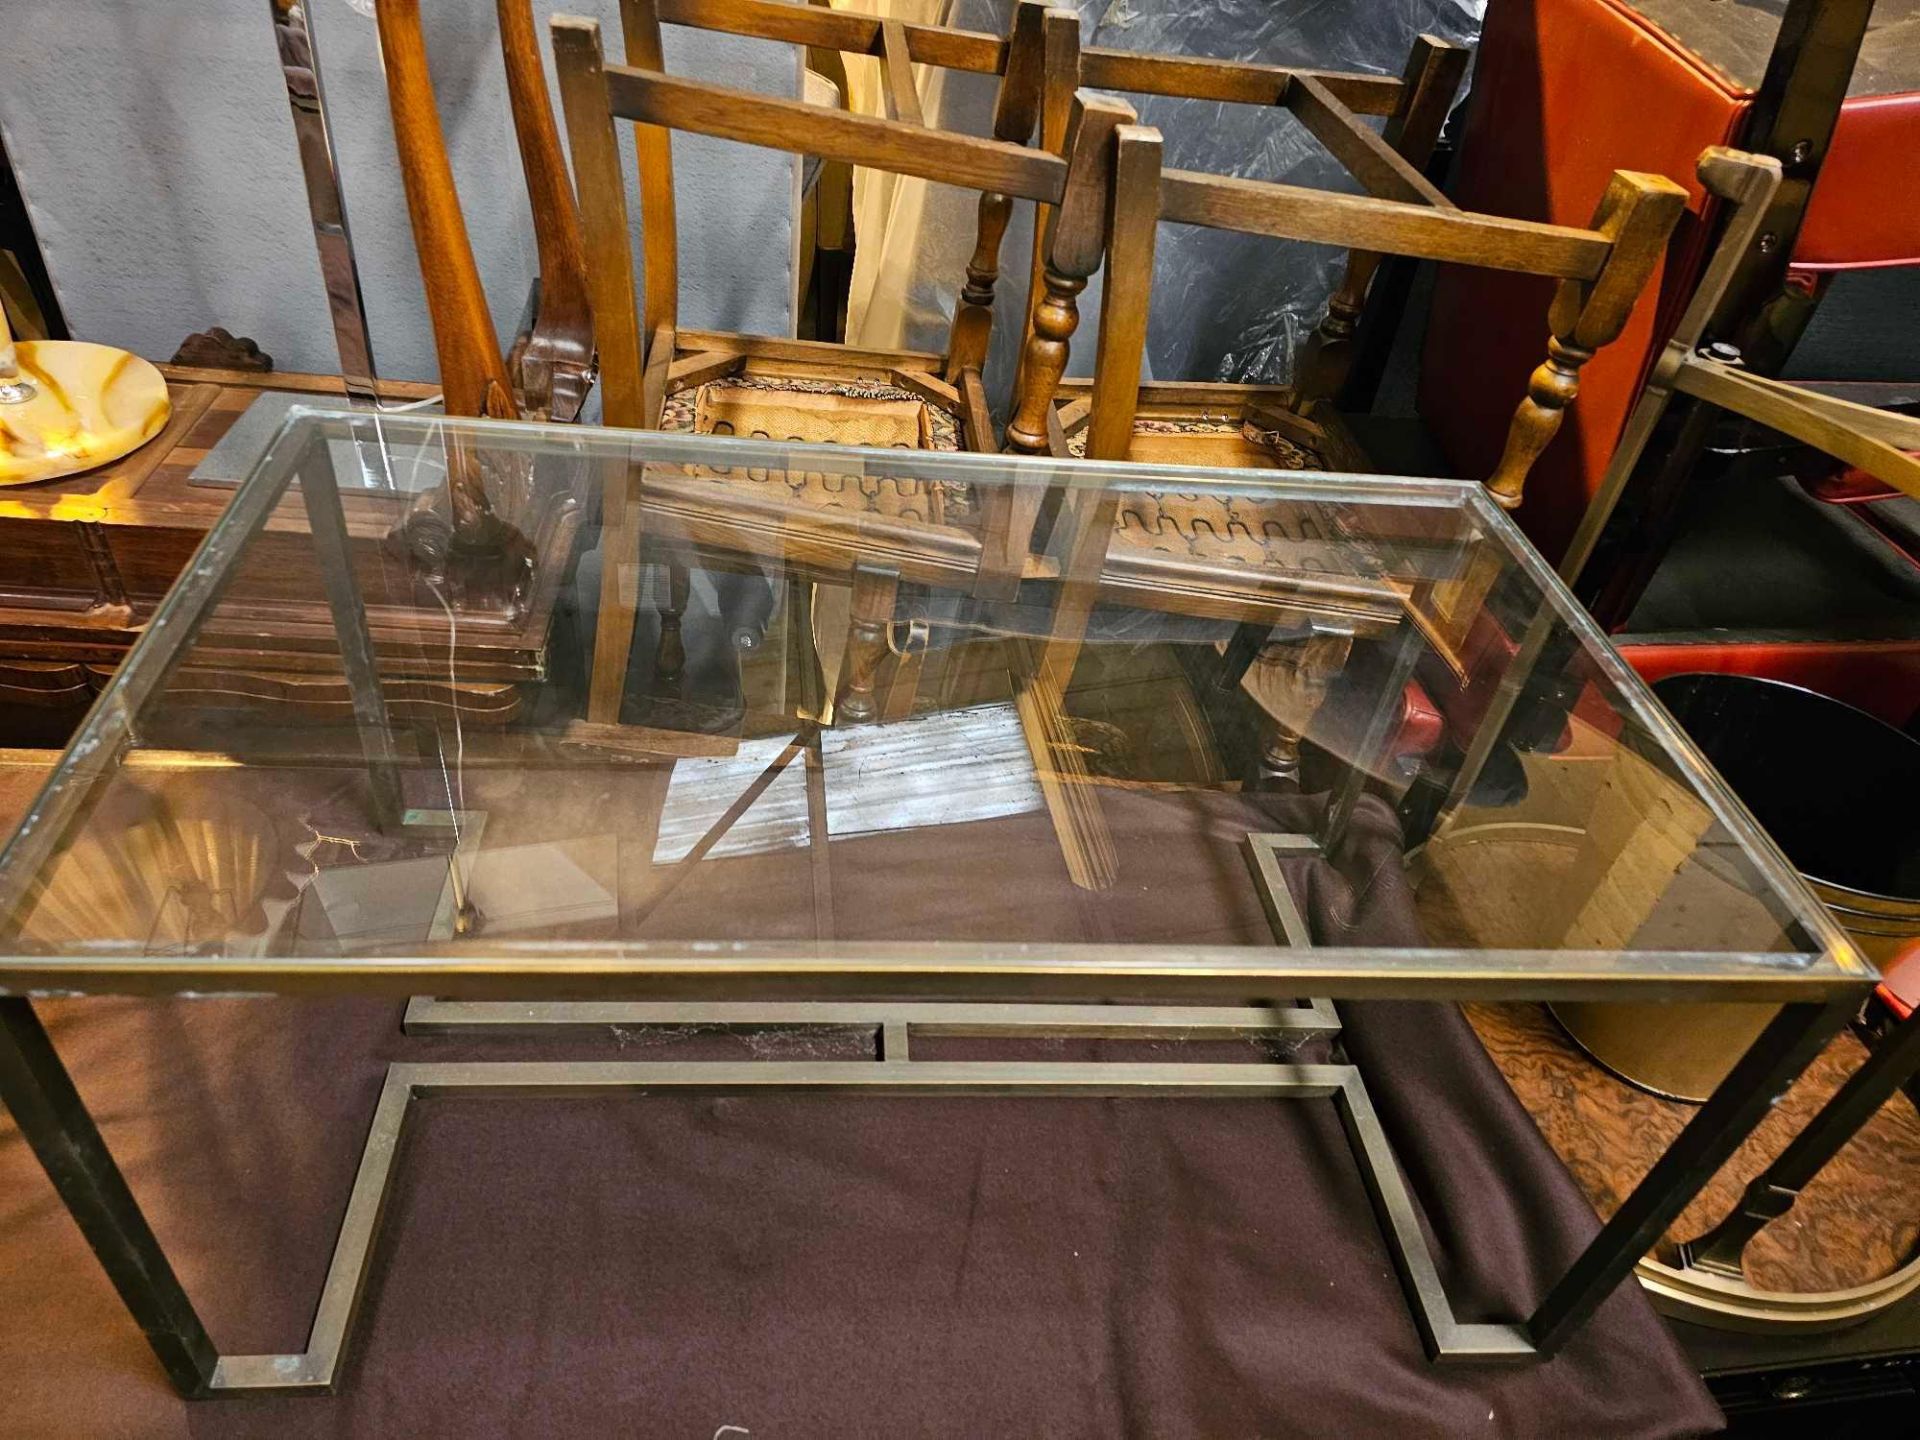 A Rectangular Coffee Table Polished Brass Frame With Clear Glass Top 90 x 50 x 42cm - Image 3 of 3